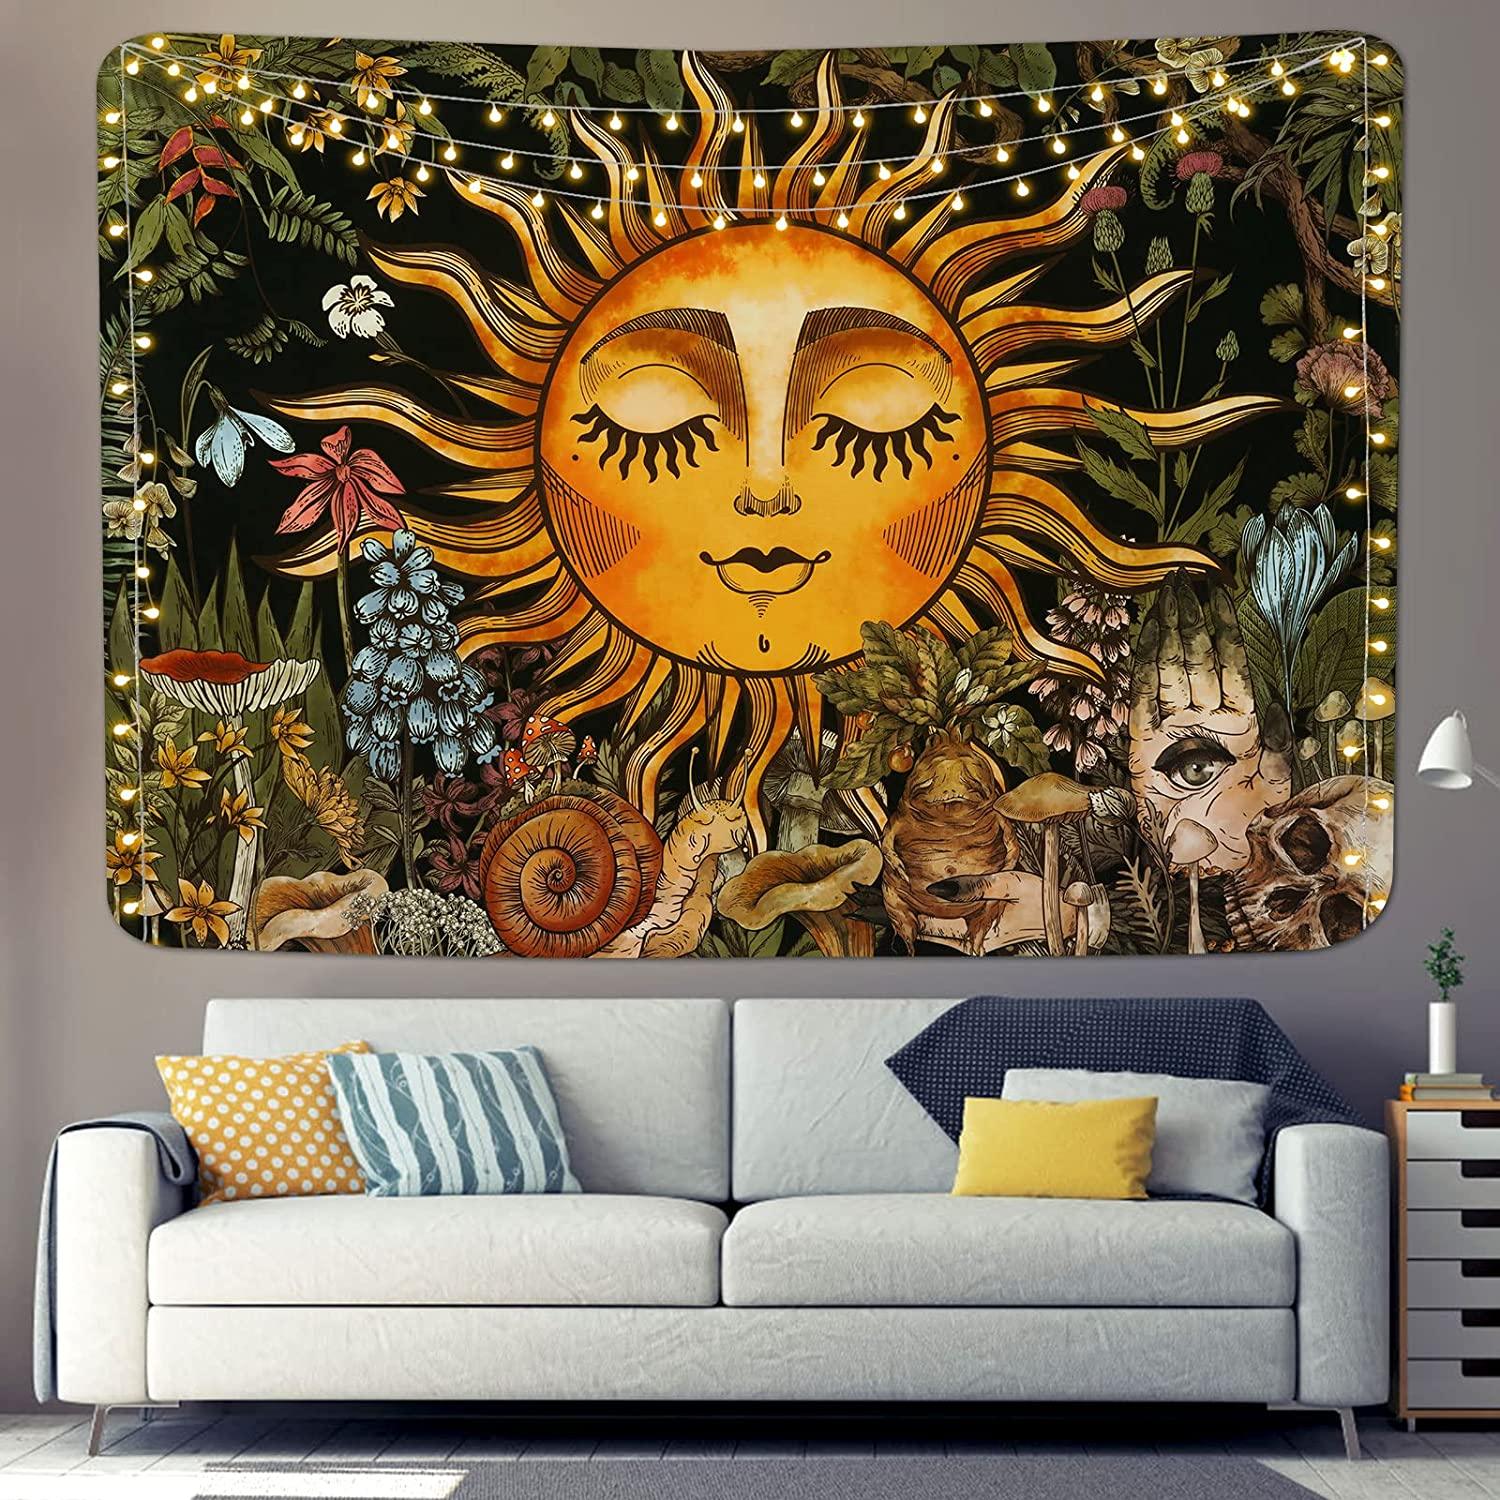 Burning Sun Tapestry Vintage Floral Tapestry Plants and Leaves Tapestries Mystic Hippie Tapestry Snail and Skull Tapestry Wall Hanging for Room(51.2 x 59.1 inches) - Decotree.co Online Shop